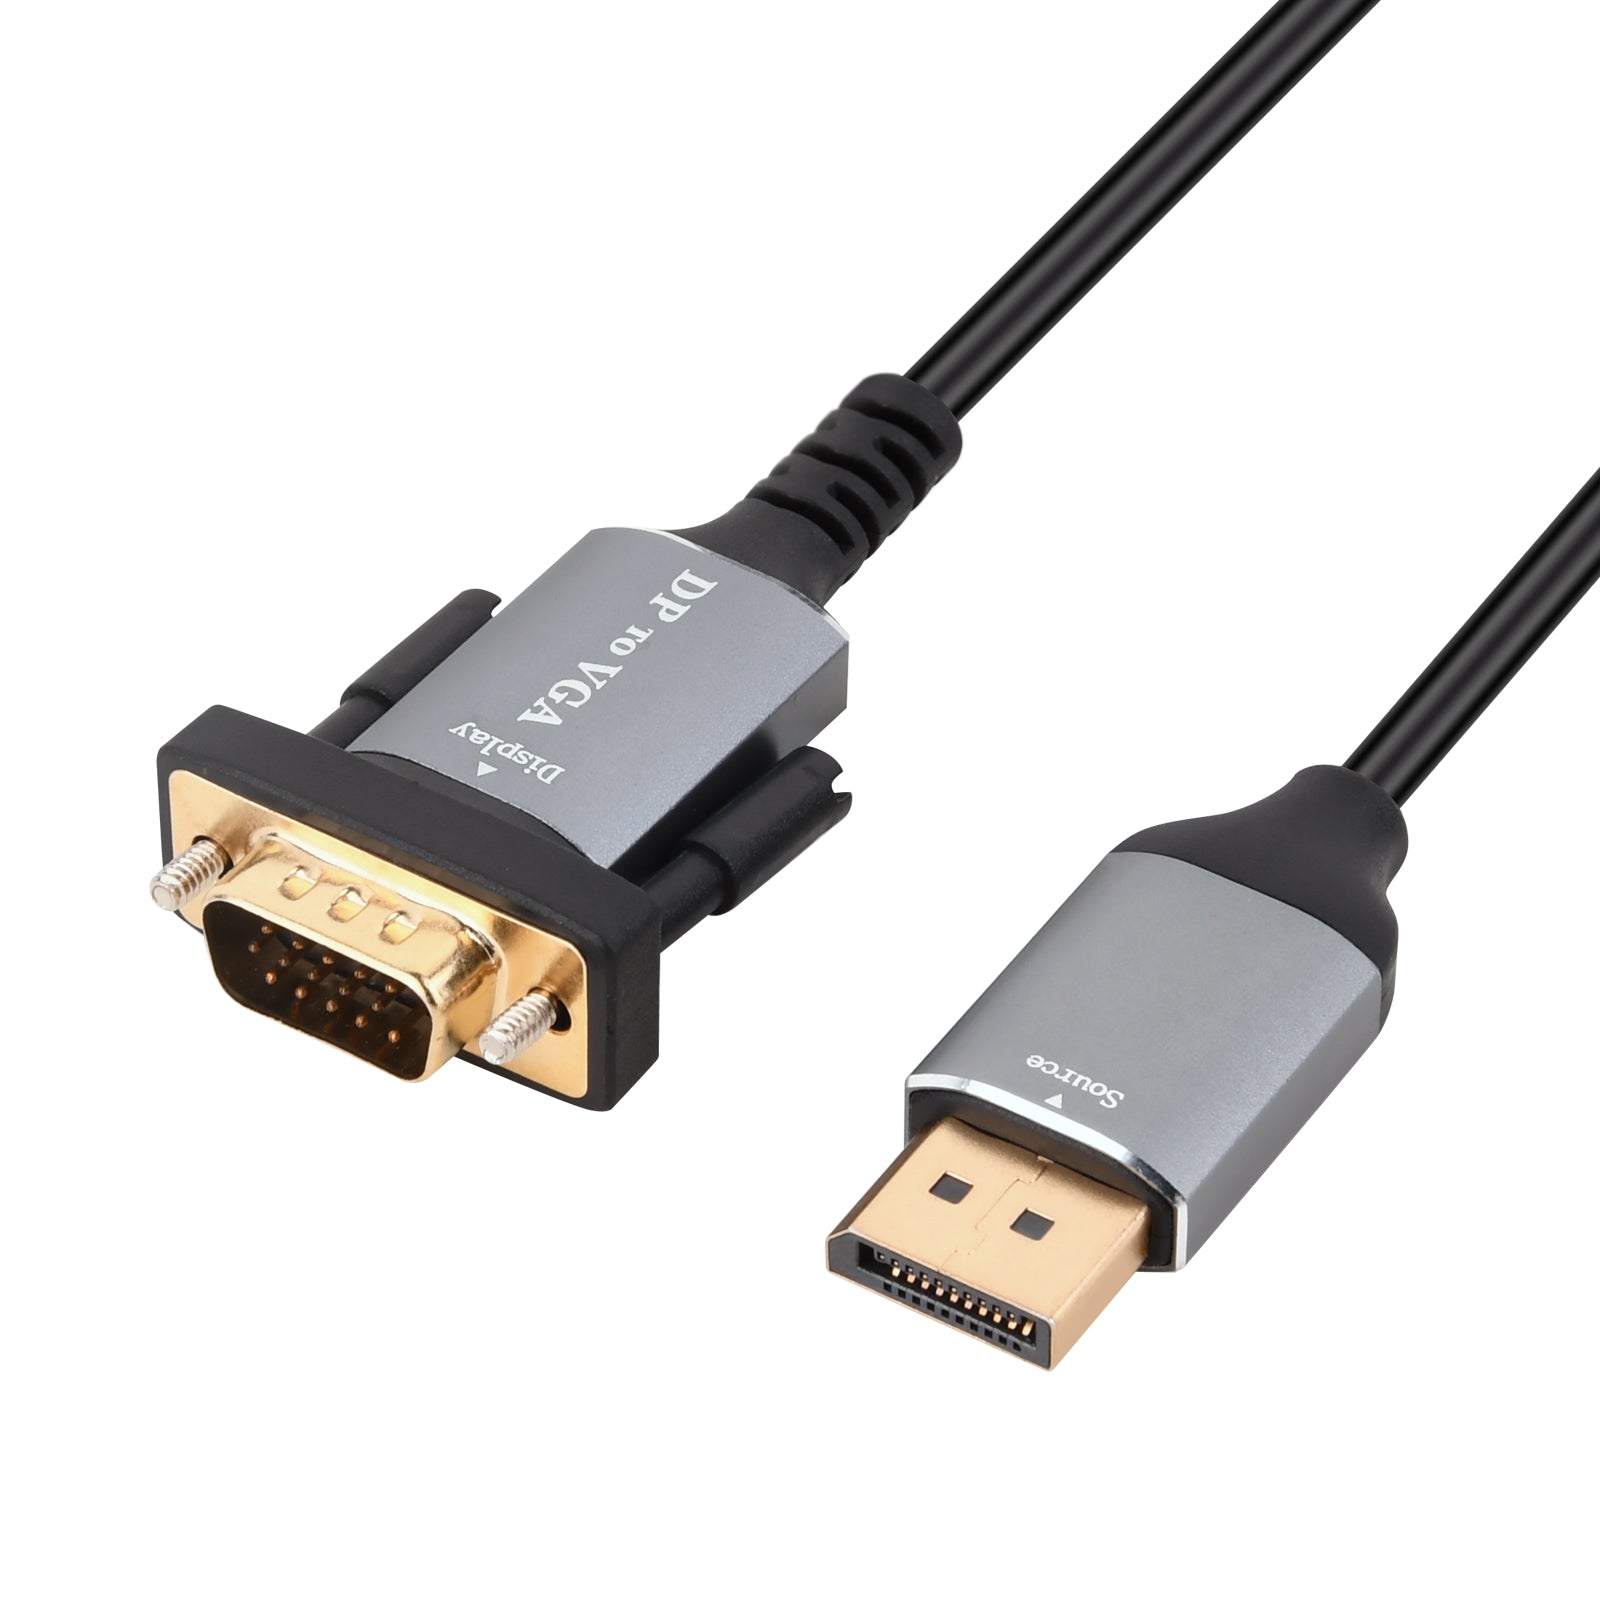 DisplayPort Male to VGA Male Video Cable (DP-VGA) 1.8m